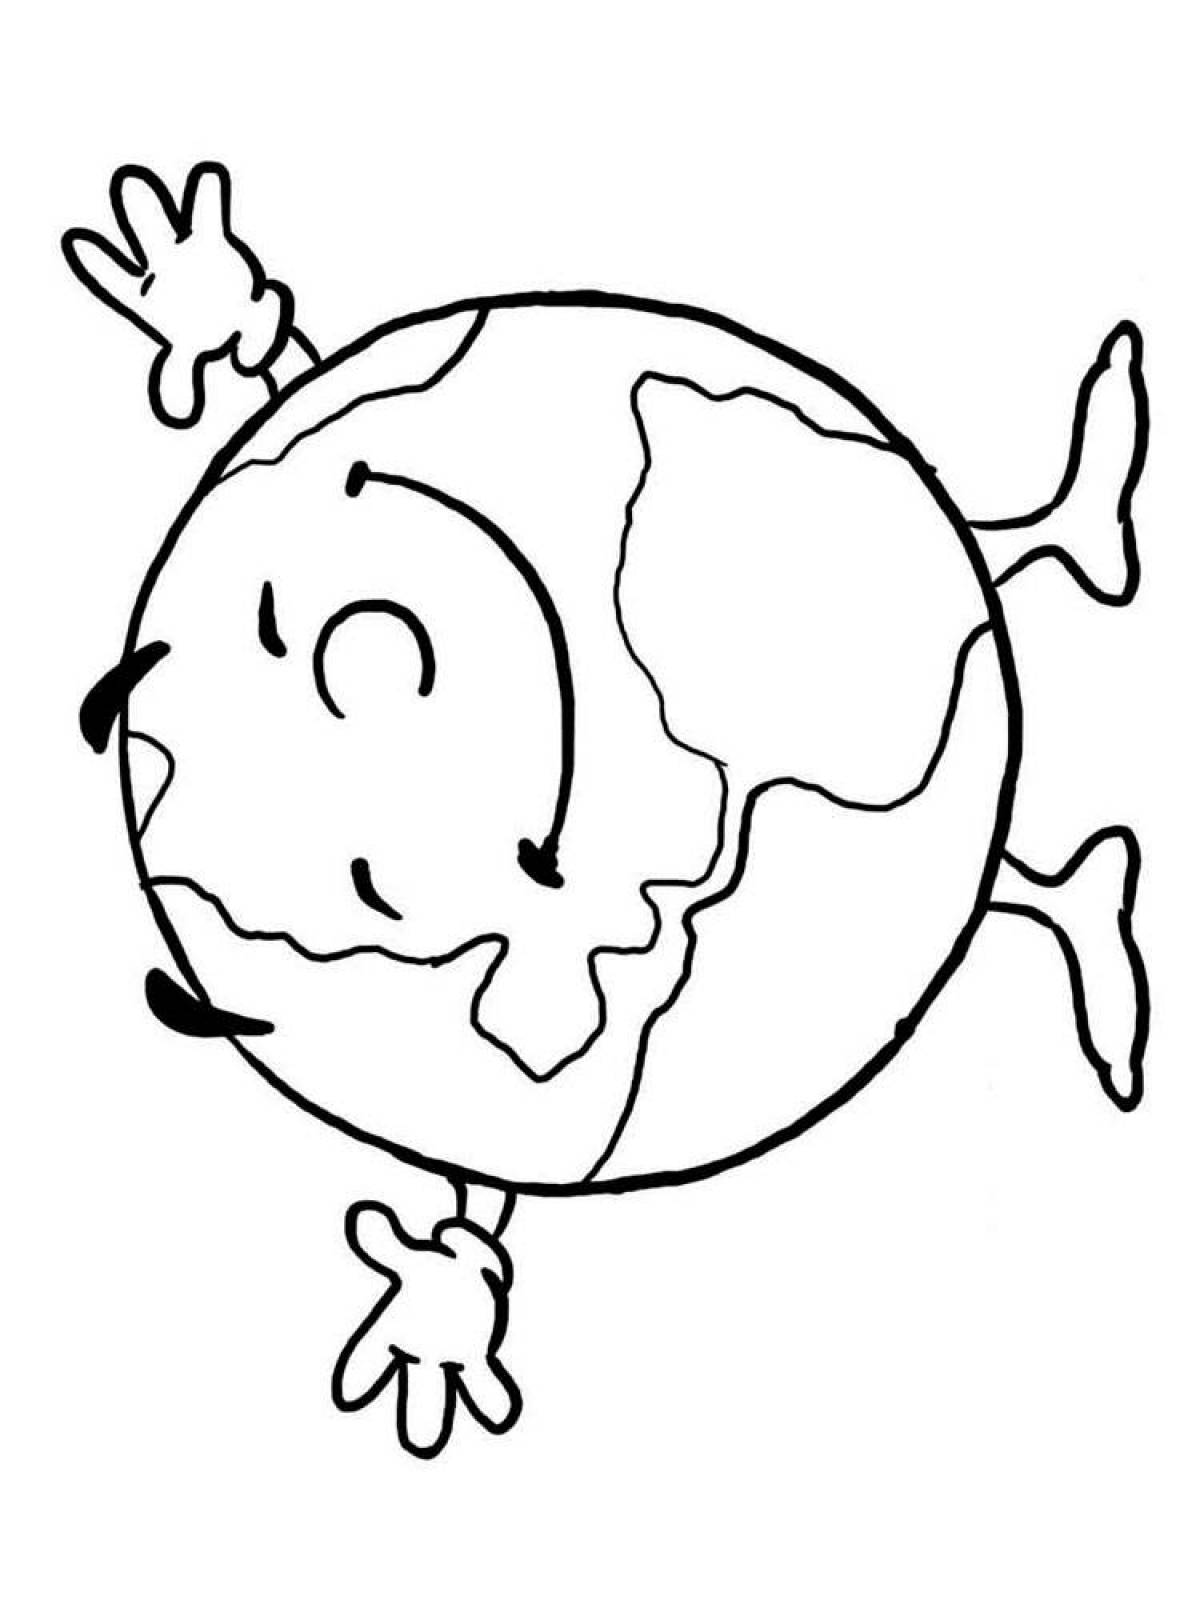 Creative planet earth coloring book for kids